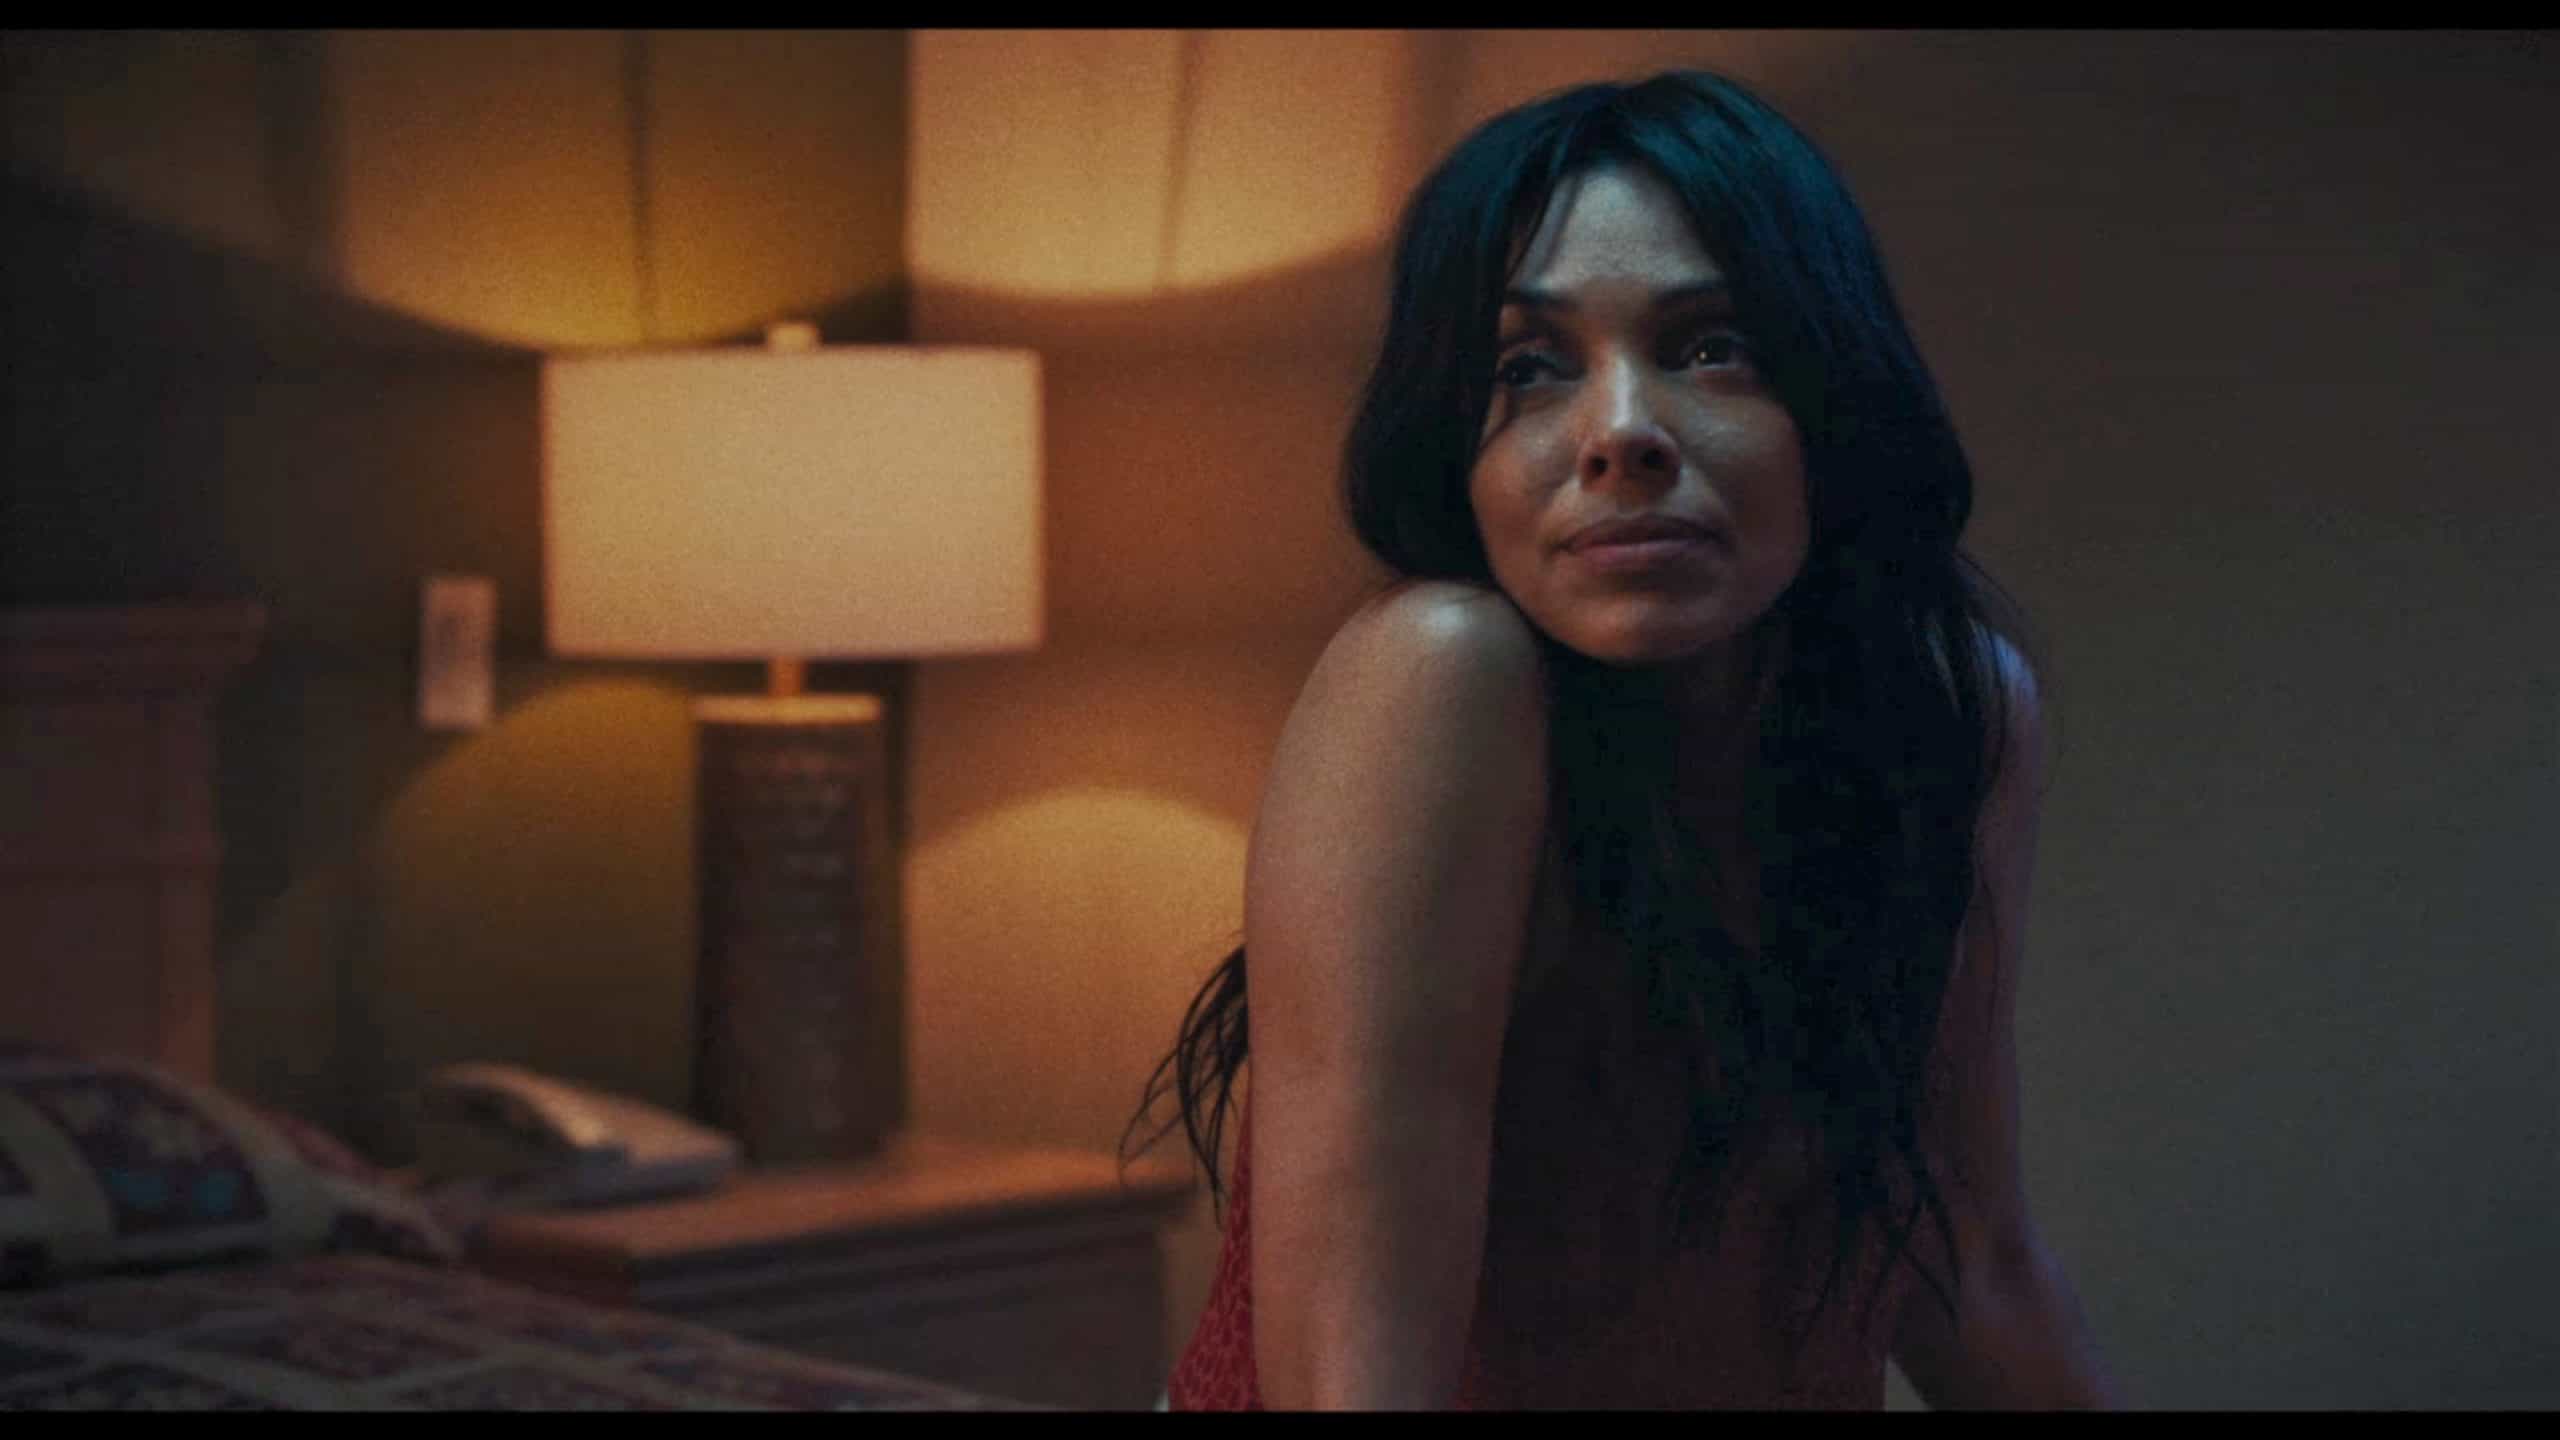 Anna (Tamara Taylor) in her motel room, talking to someone who she used to commonly sleep with